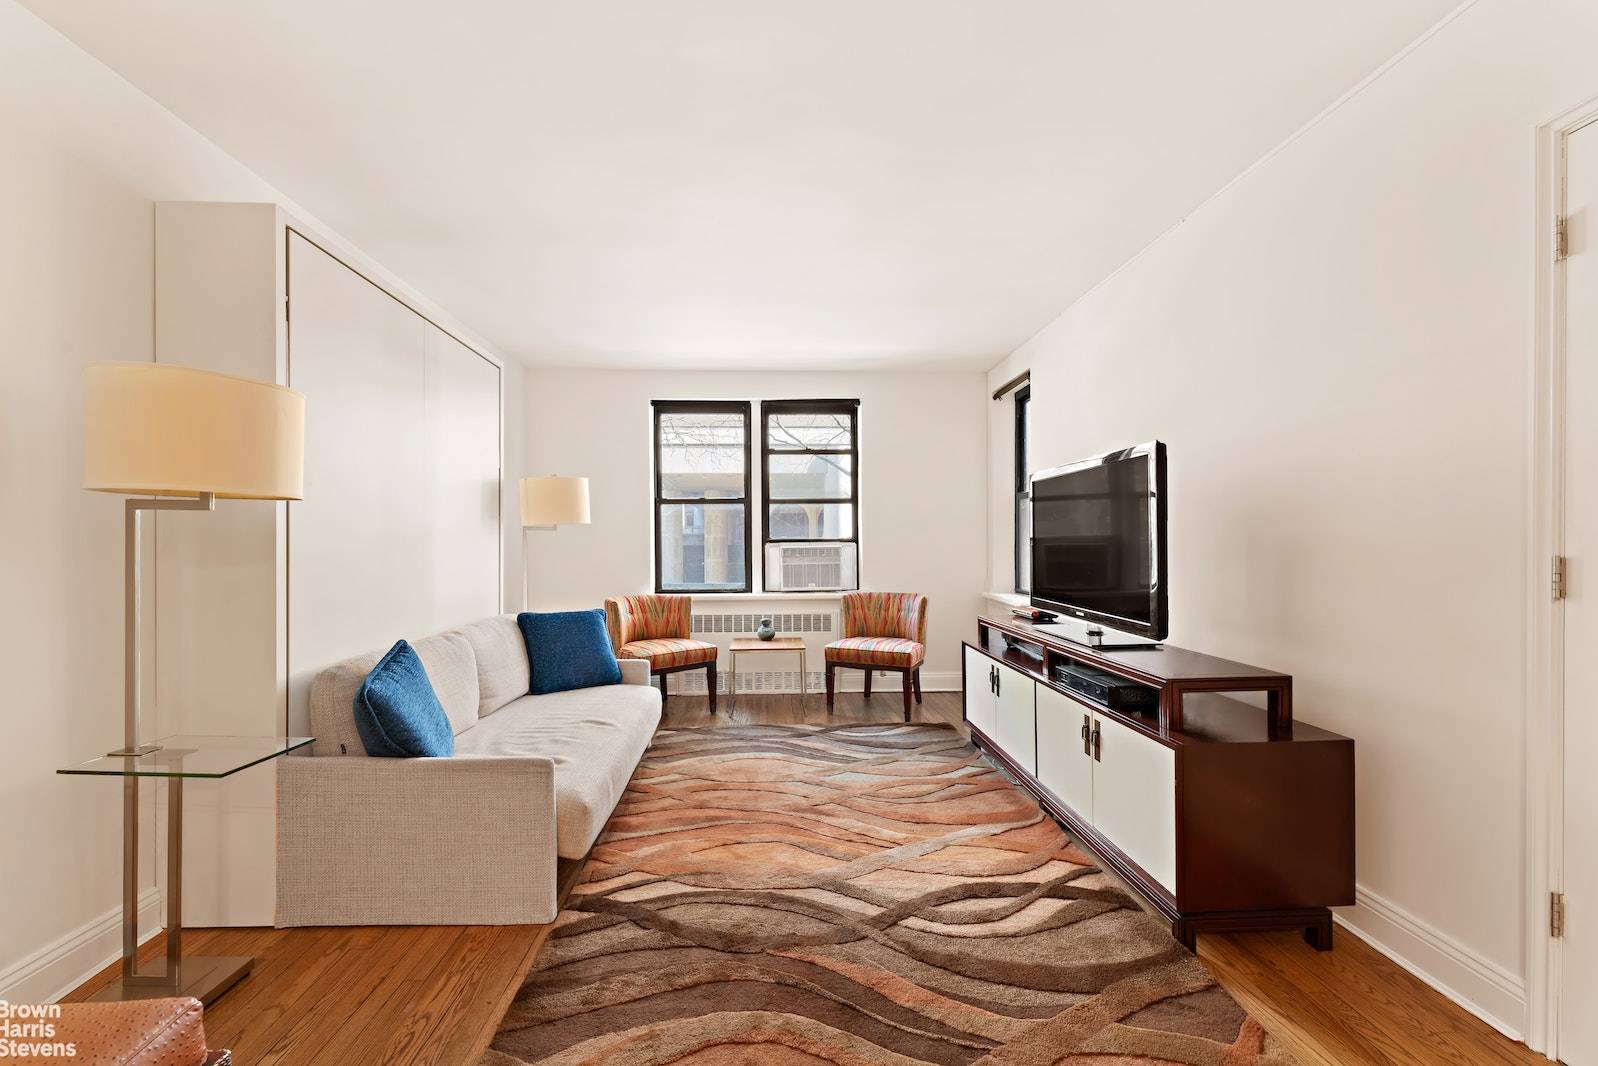 Exclusive Listing, A perfect Pied a Terre studio apartment in Greenwich Village at 54 east 8th street between Mercer and Greene street.